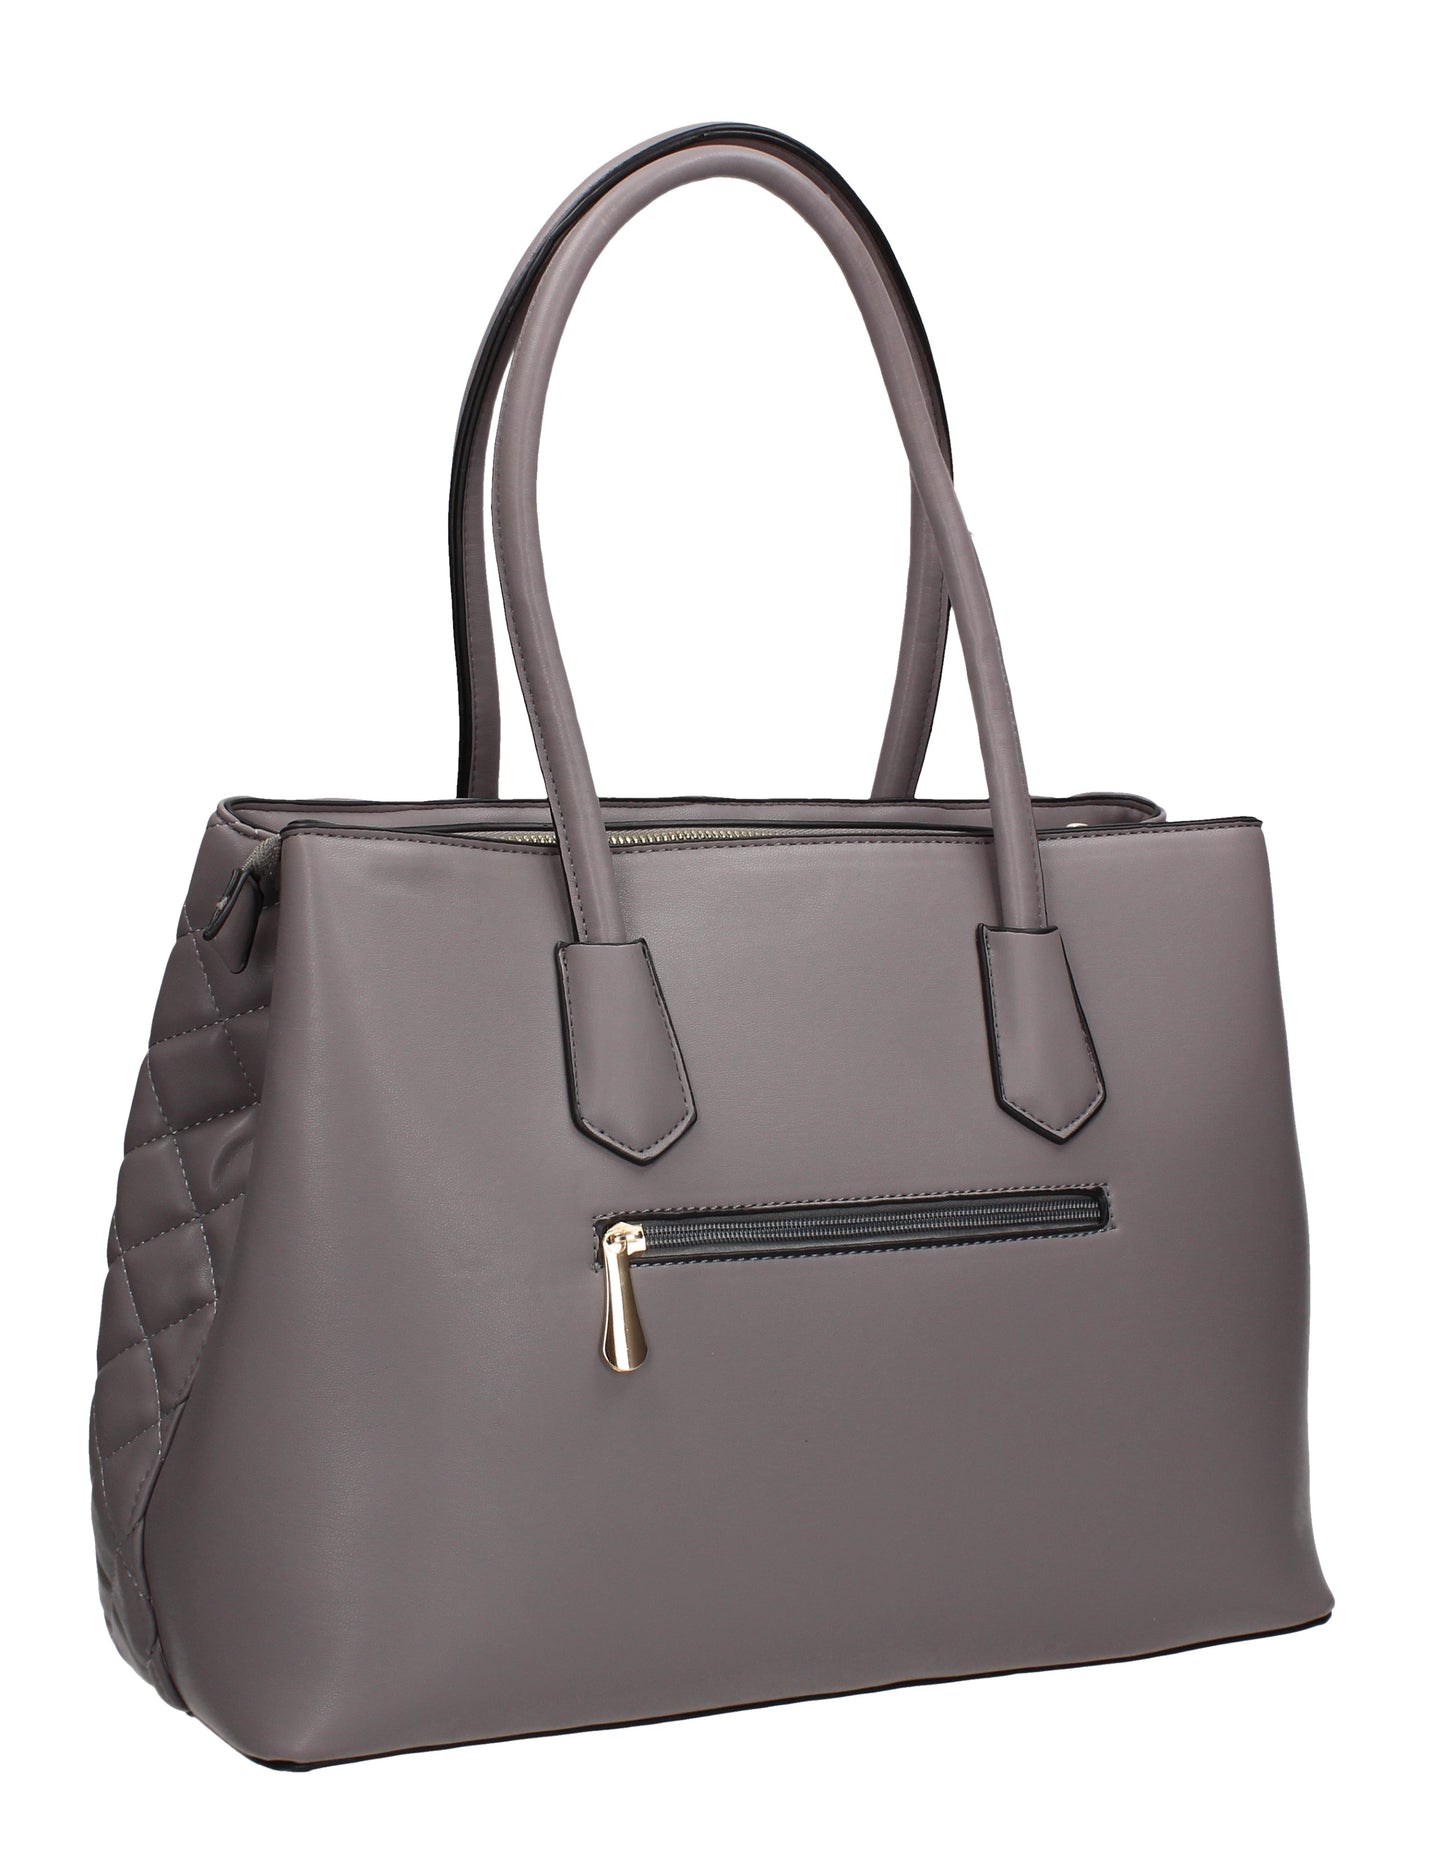 Buy your Valeria Handbag Grey Today! Buy with confidence from Swankyswans